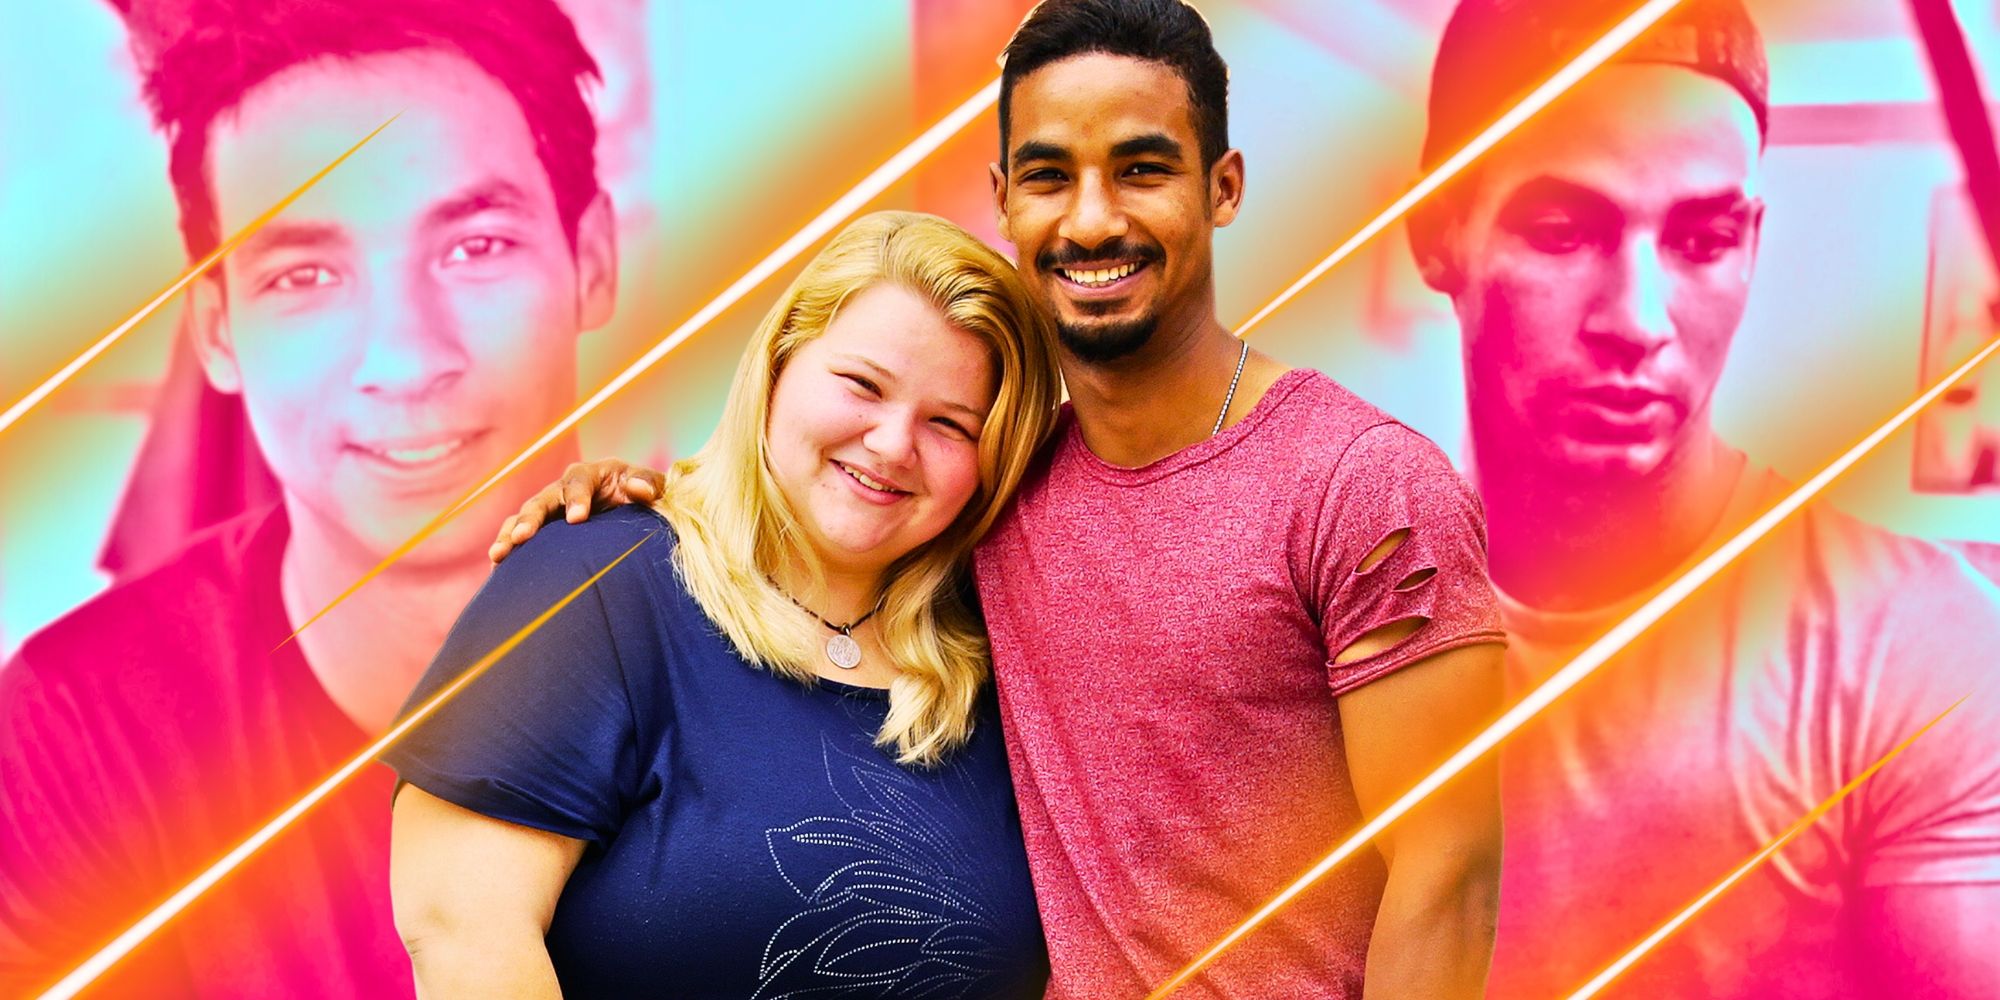 90 Day Fiancé's Azan and Nicole with Azan promo shot with Azan from show and IG in background